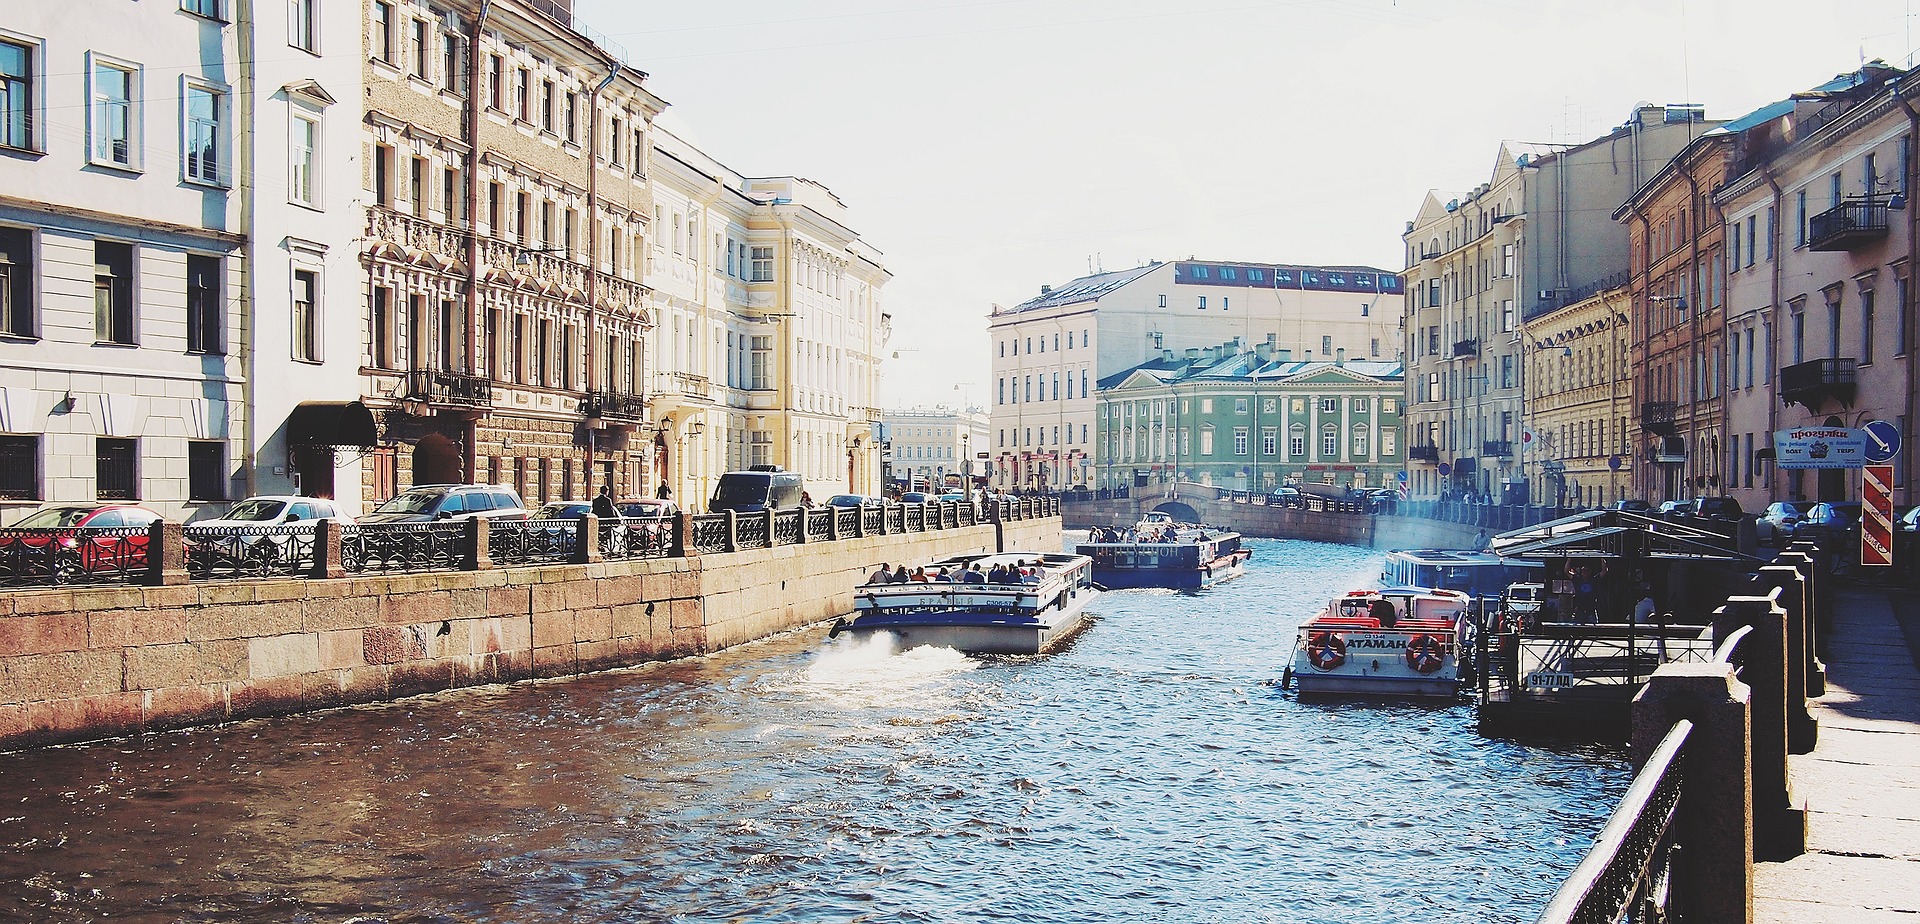 St Petersburg wins European city destination of the year at World Travel Awards